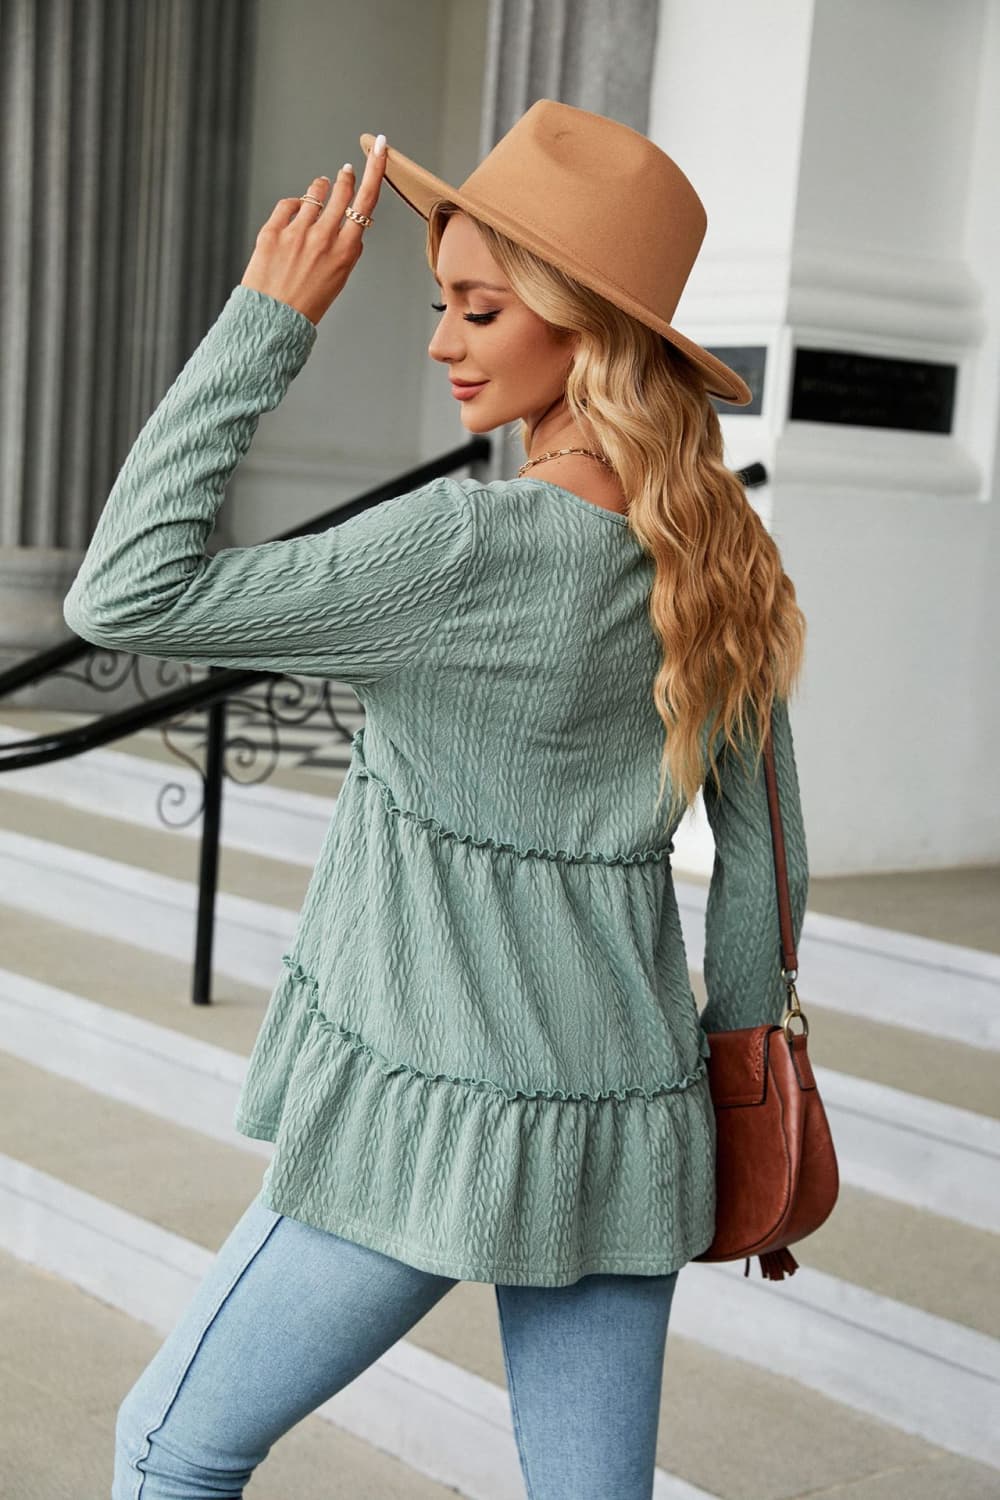 Long Sleeve V-Neck Cable-Knit Blouse - Women’s Clothing & Accessories - Shirts & Tops - 6 - 2024